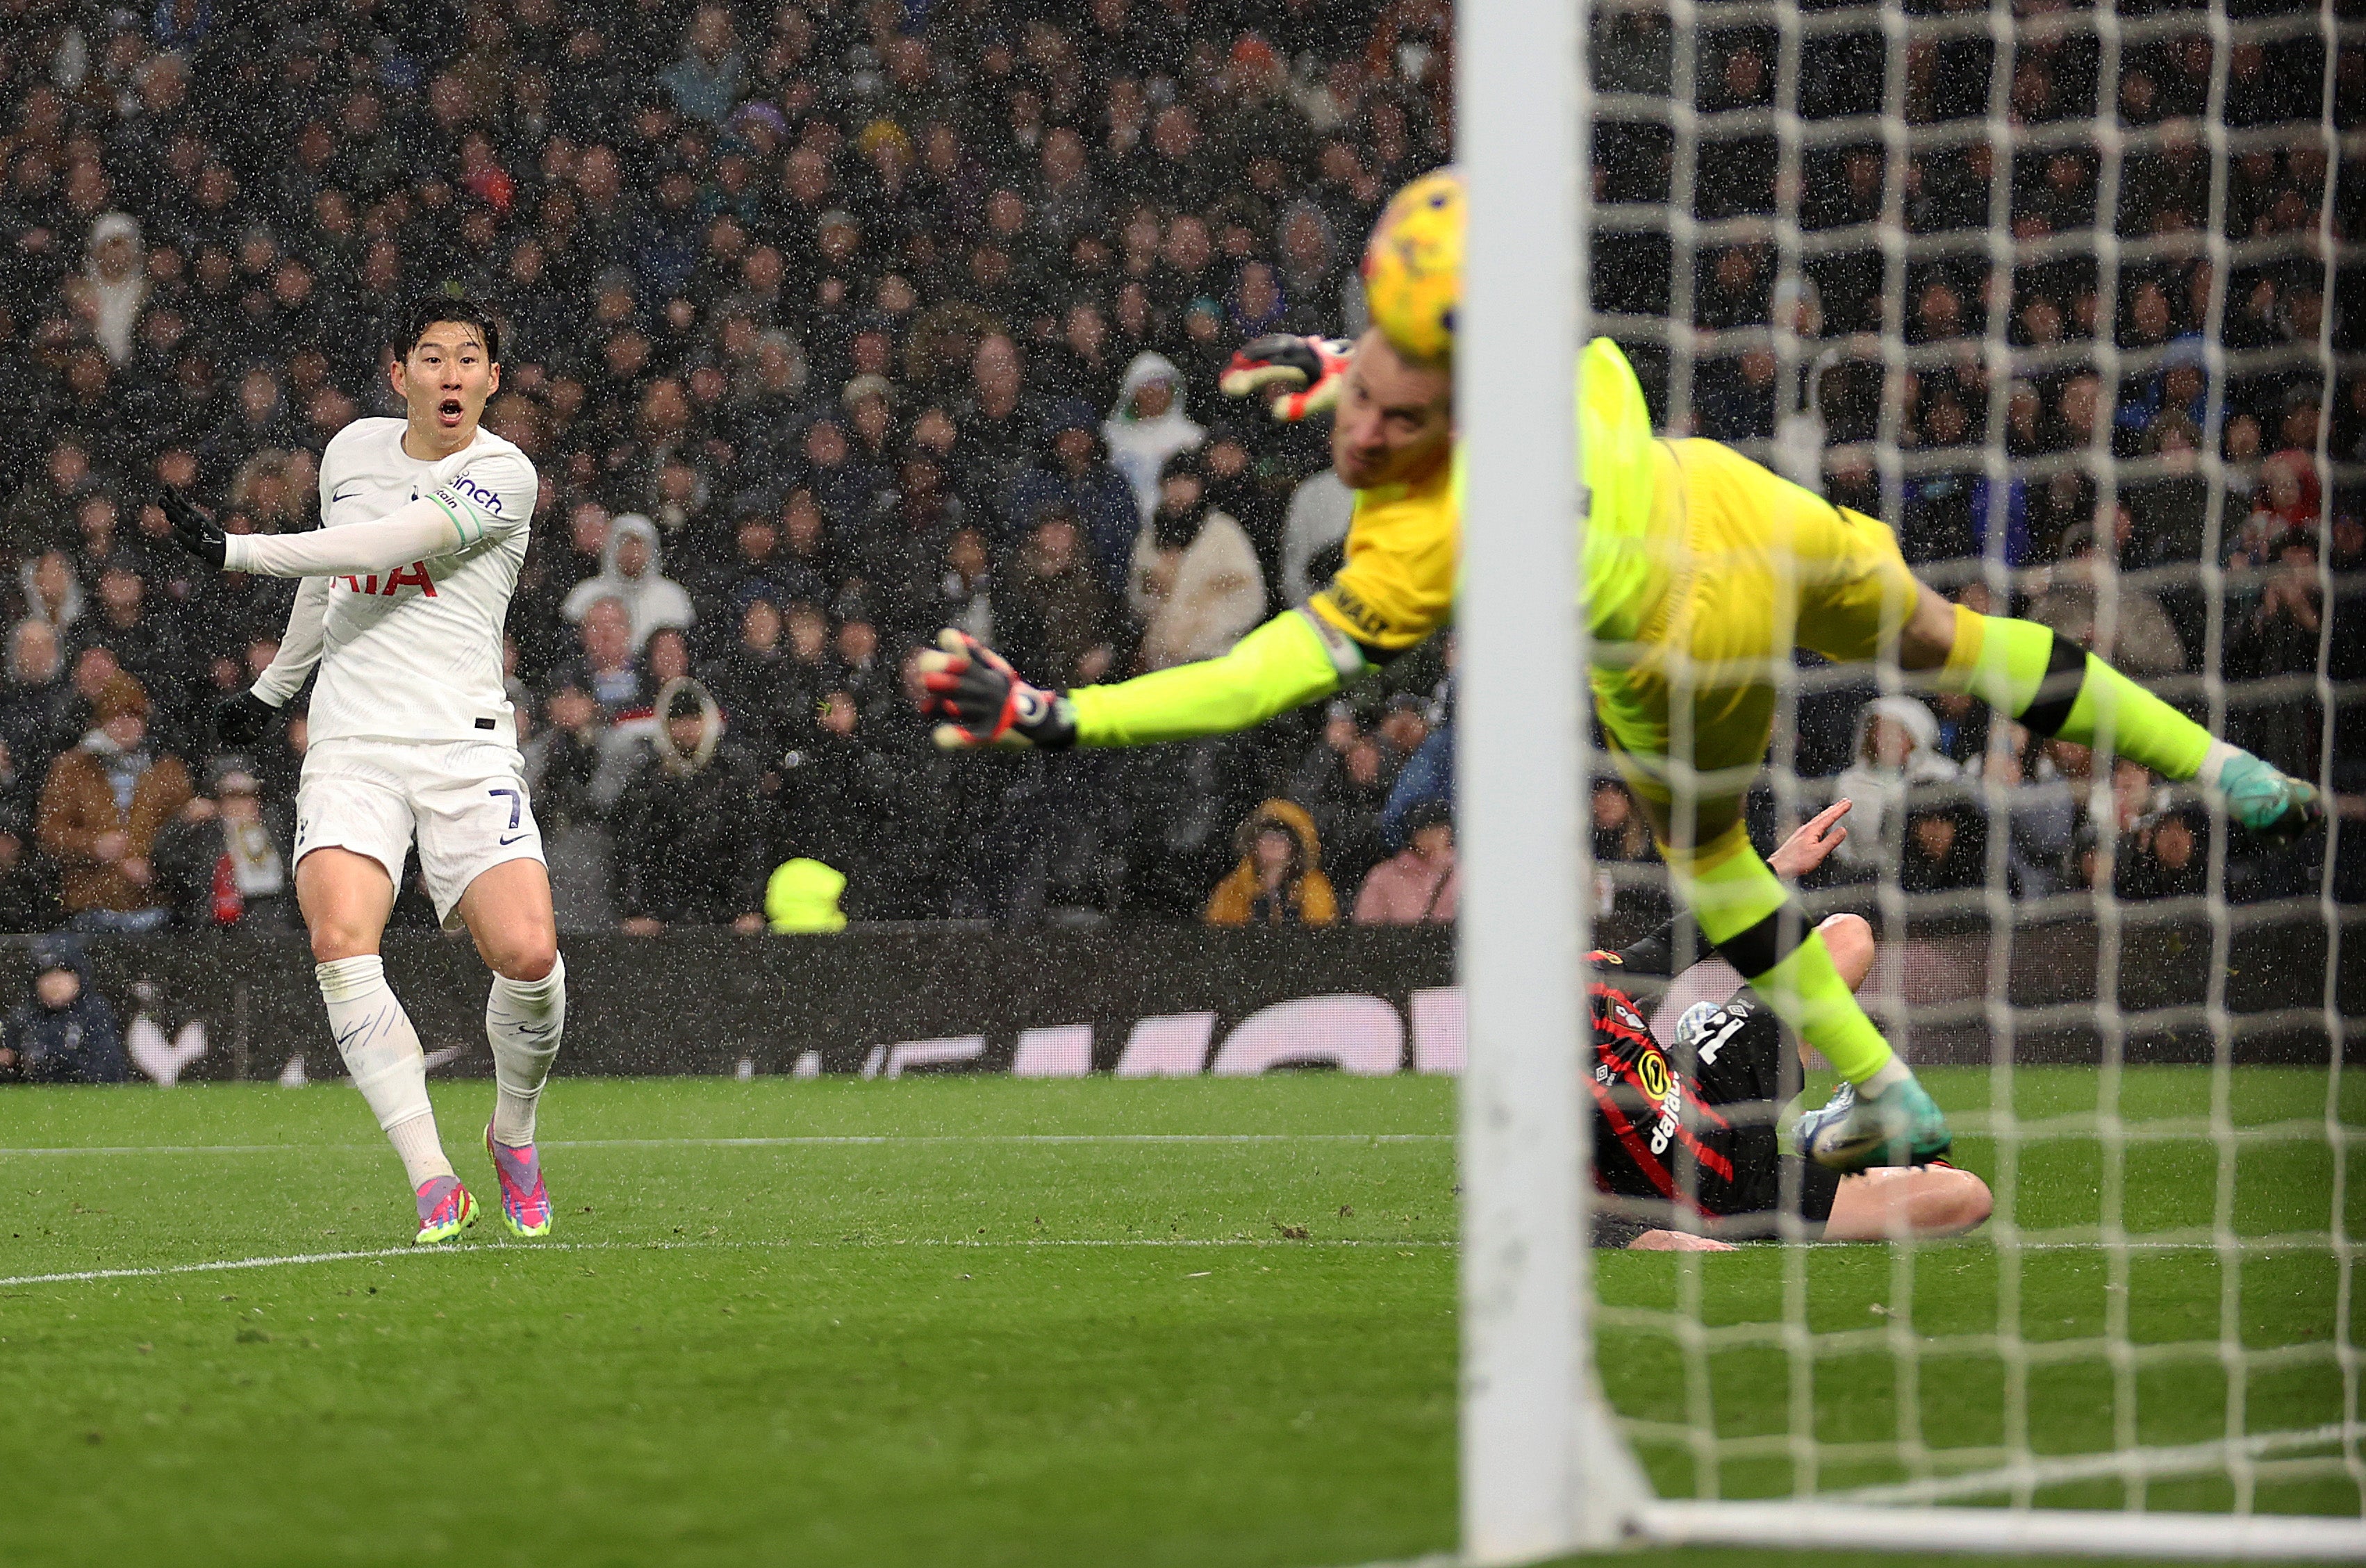 Son Heung-min curls one past the keeper for Spur’s second goal on Sunday